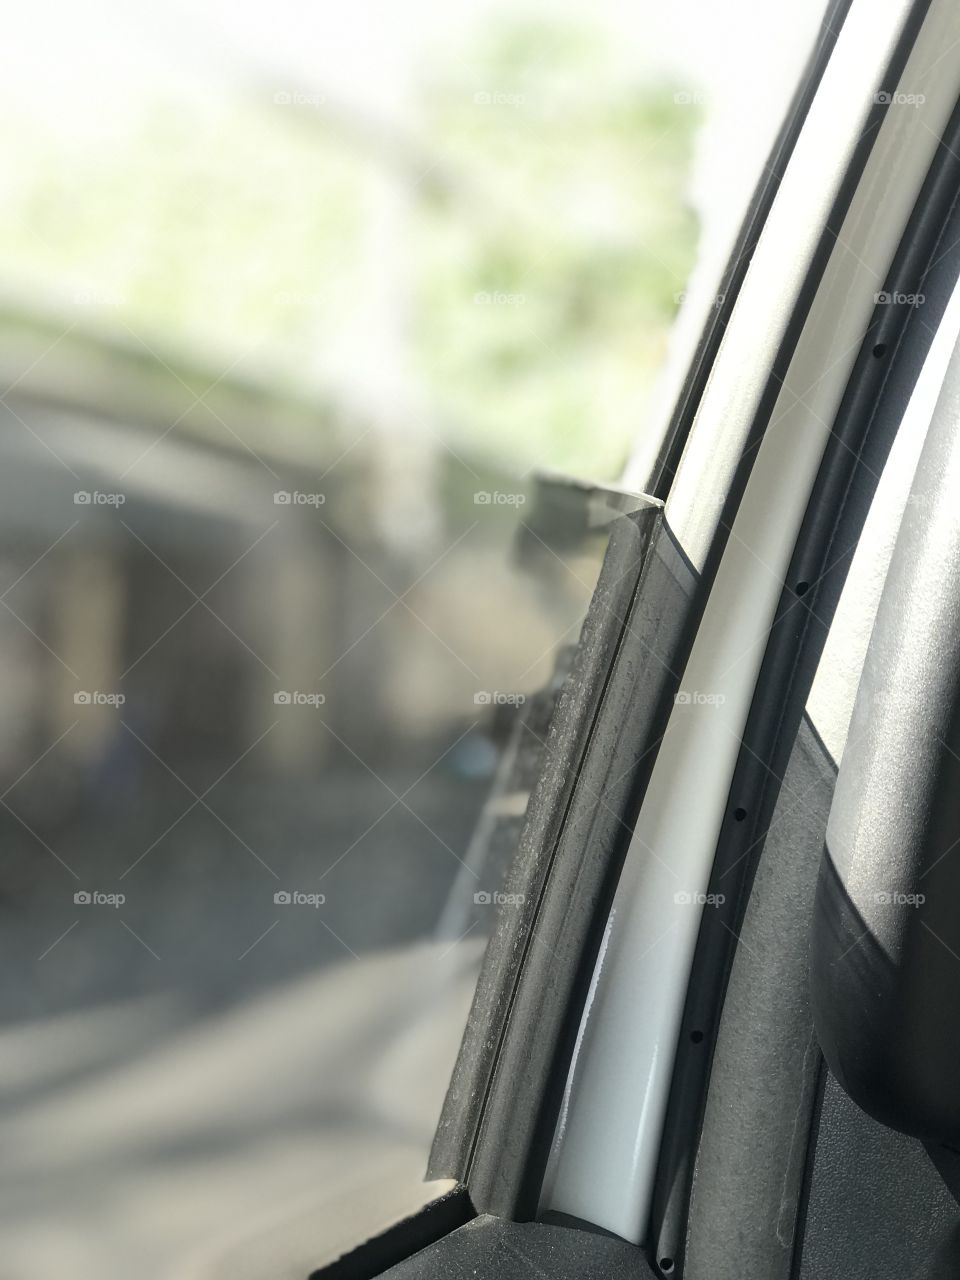 Window are the transparent opening in a vehicle that allow vision out of the sides or back. Looking at things from the same window can sometimes provide different perspectives depend on the viewers.